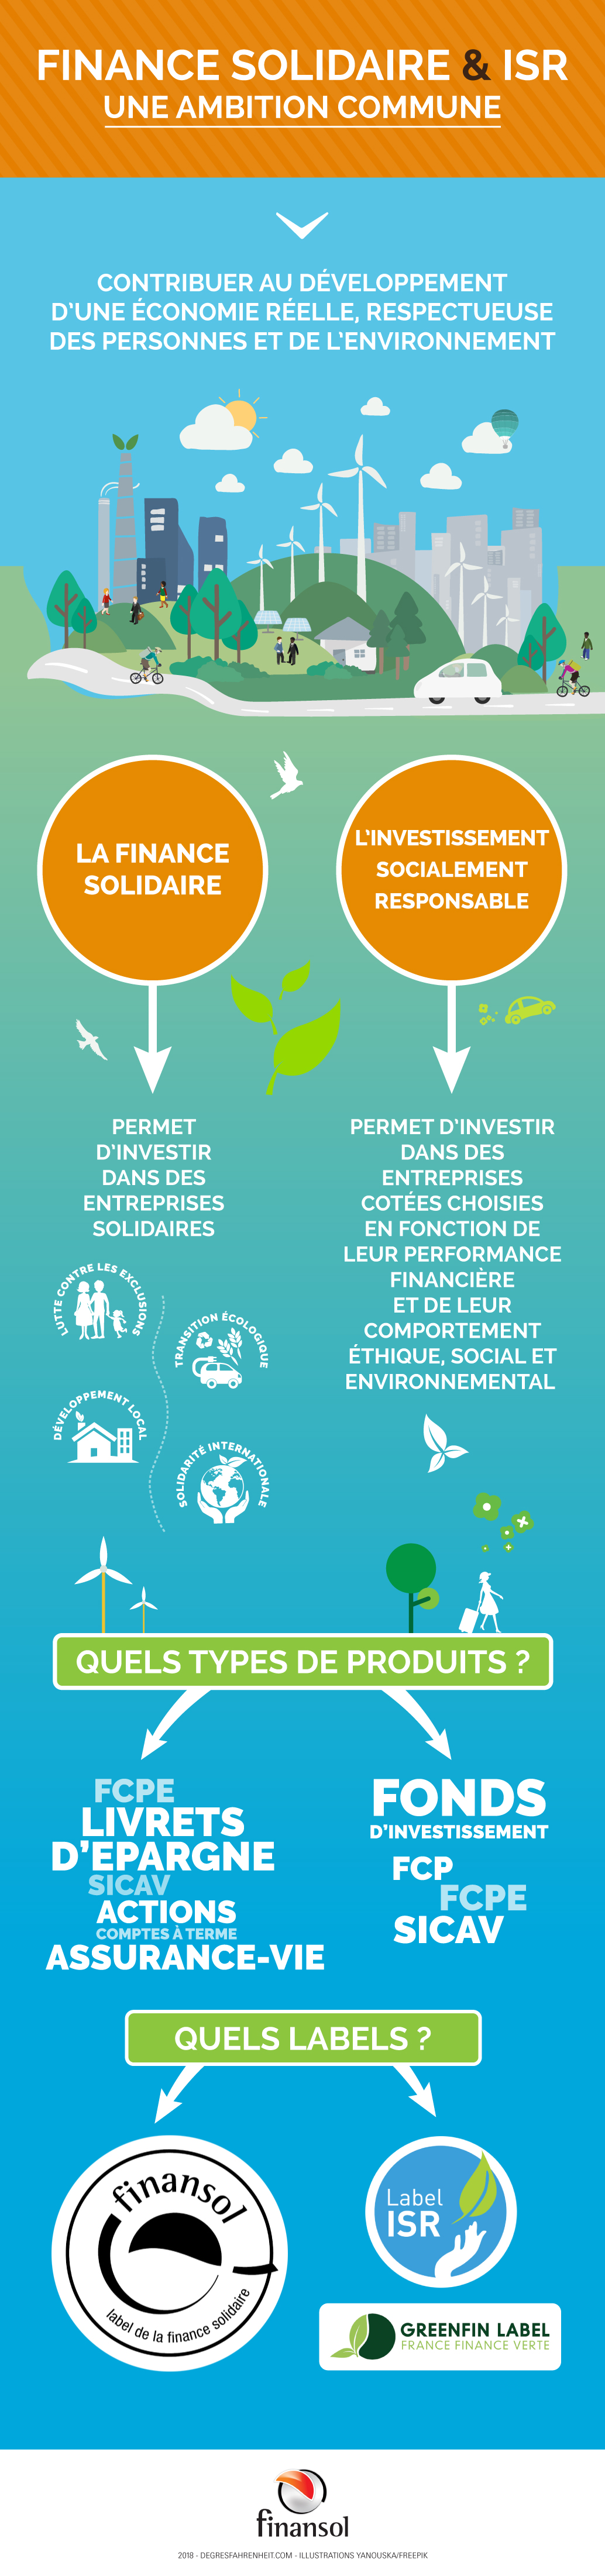 Infographie difference ISR et finance solidaire